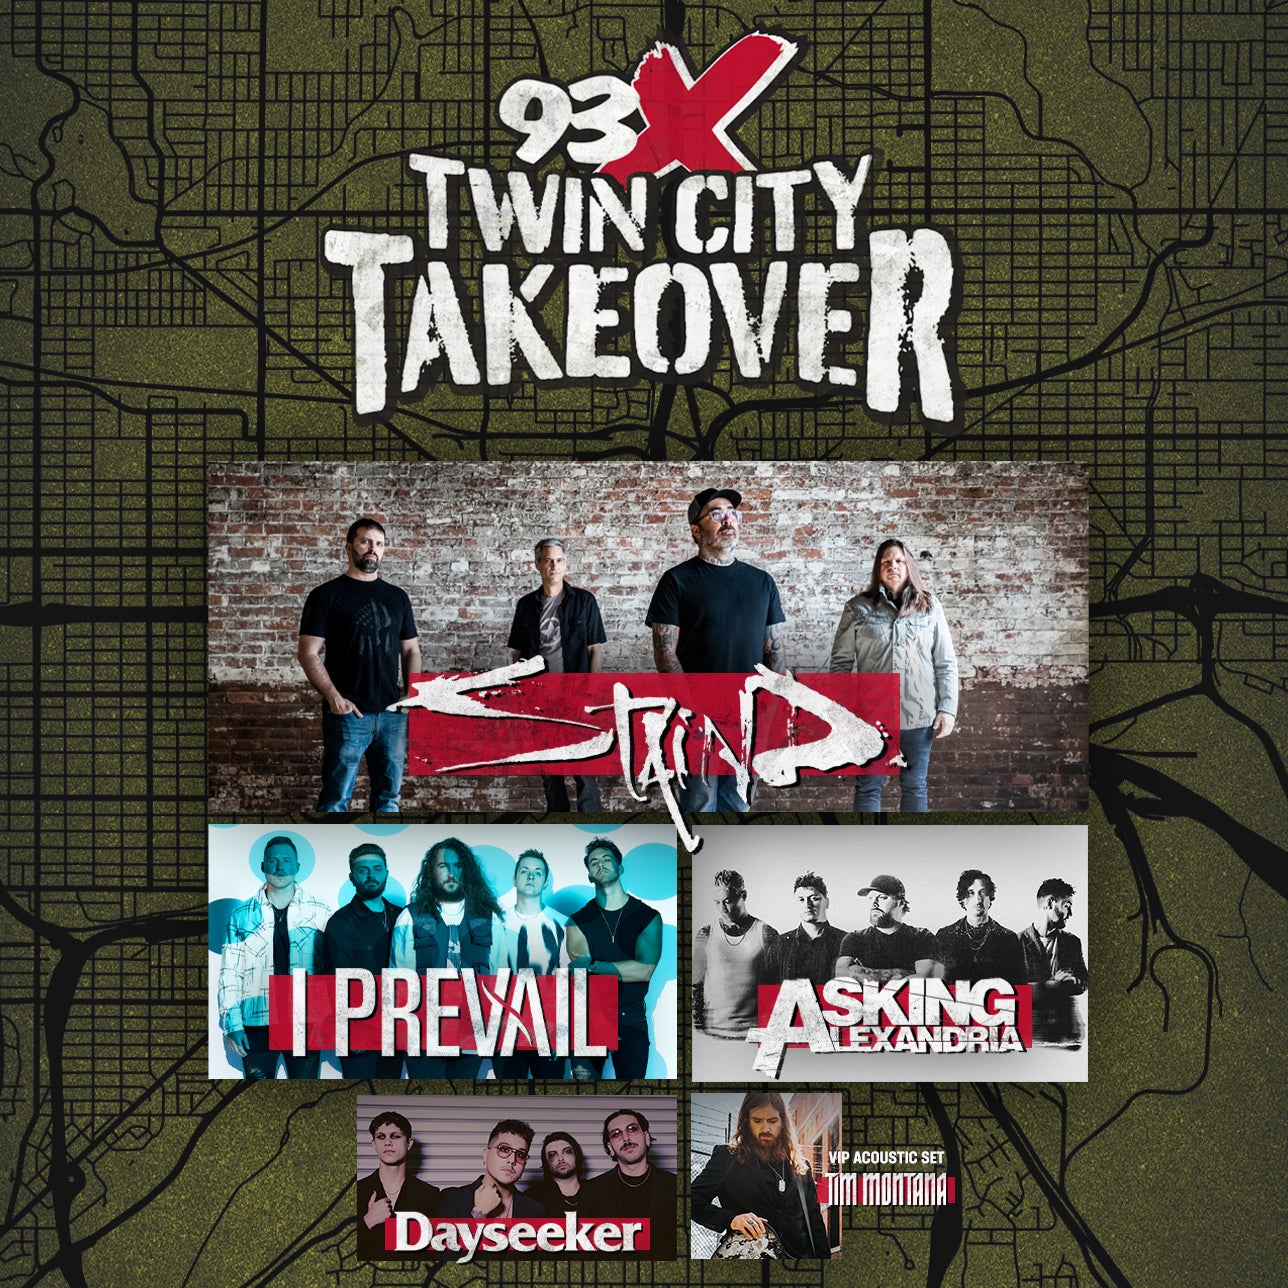 93X Twin City Takeover starring Staind Xcel Energy Center